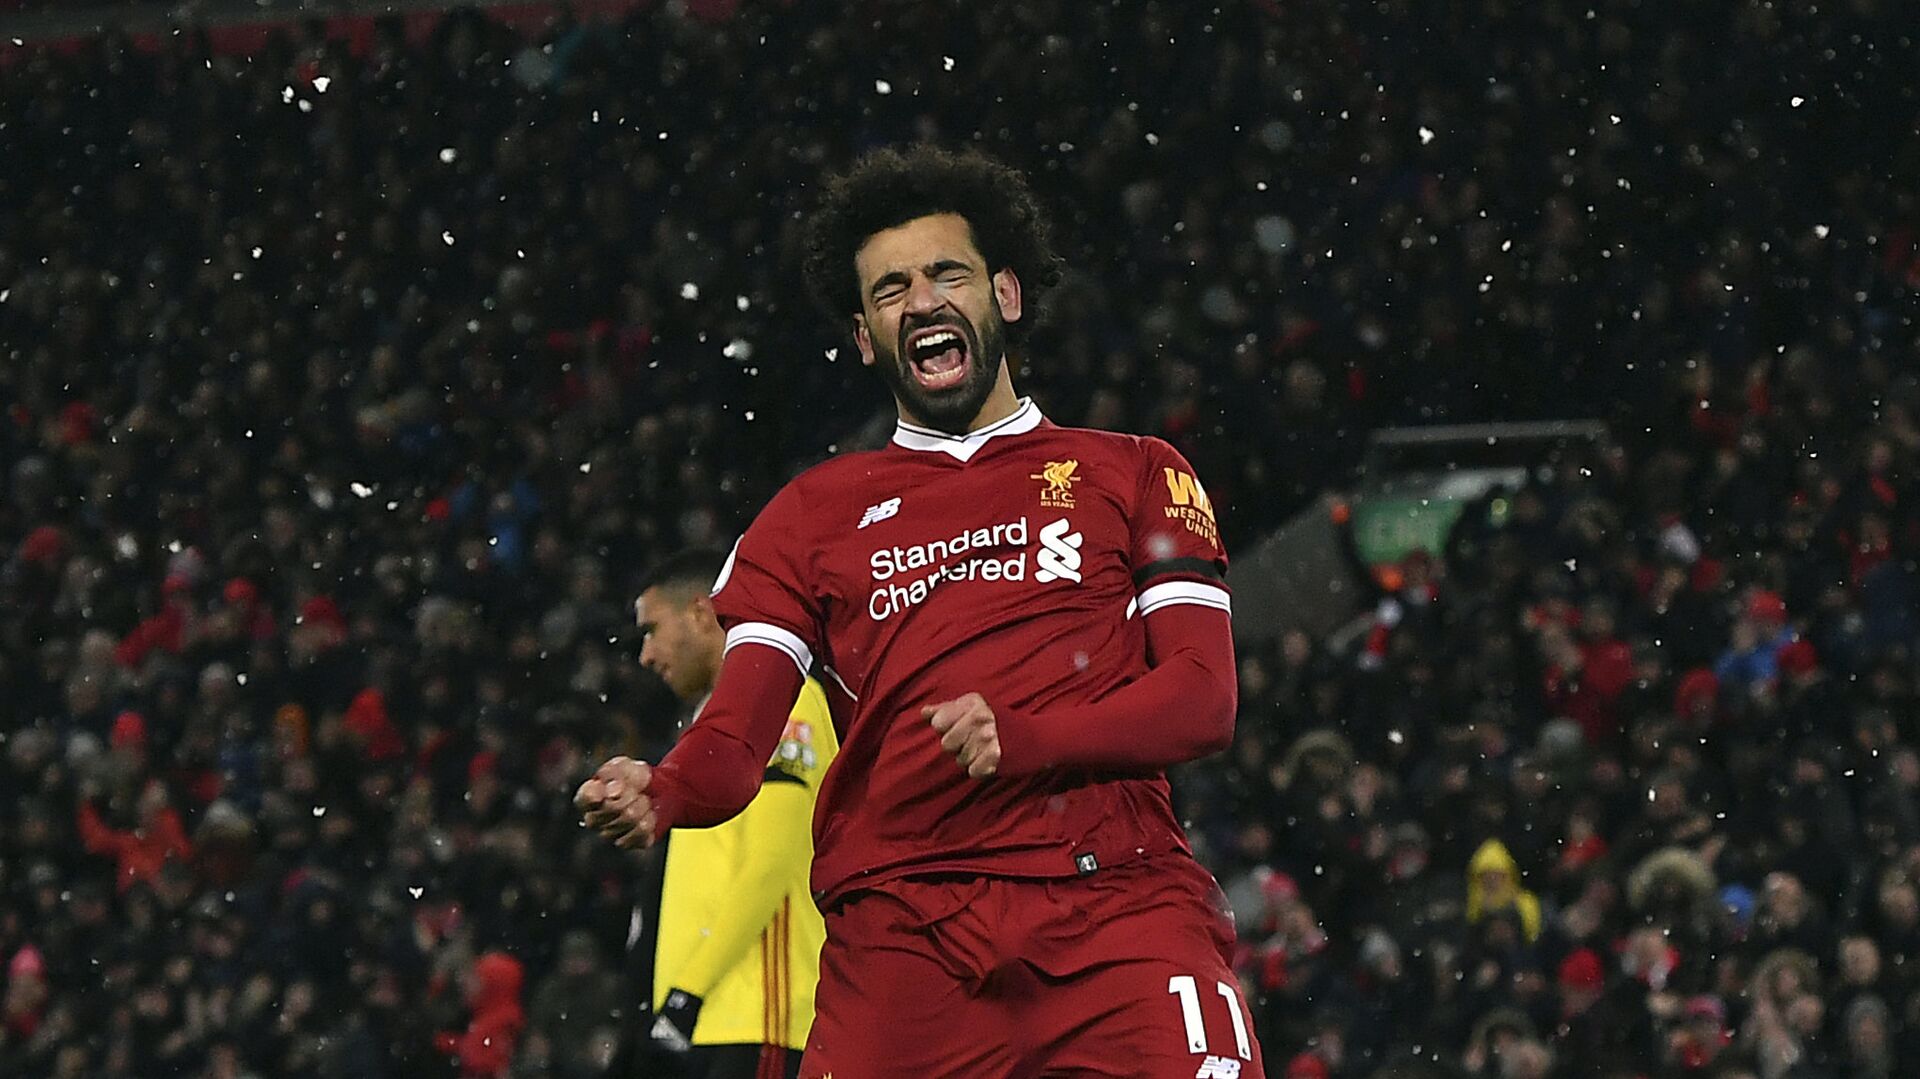 Liverpool's Mohamed Salah celebrates scoring his hat-trick during the English Premier League soccer match between Liverpool and Watford at Anfield, Liverpool, England - اسپوتنیک افغانستان  , 1920, 01.01.2022